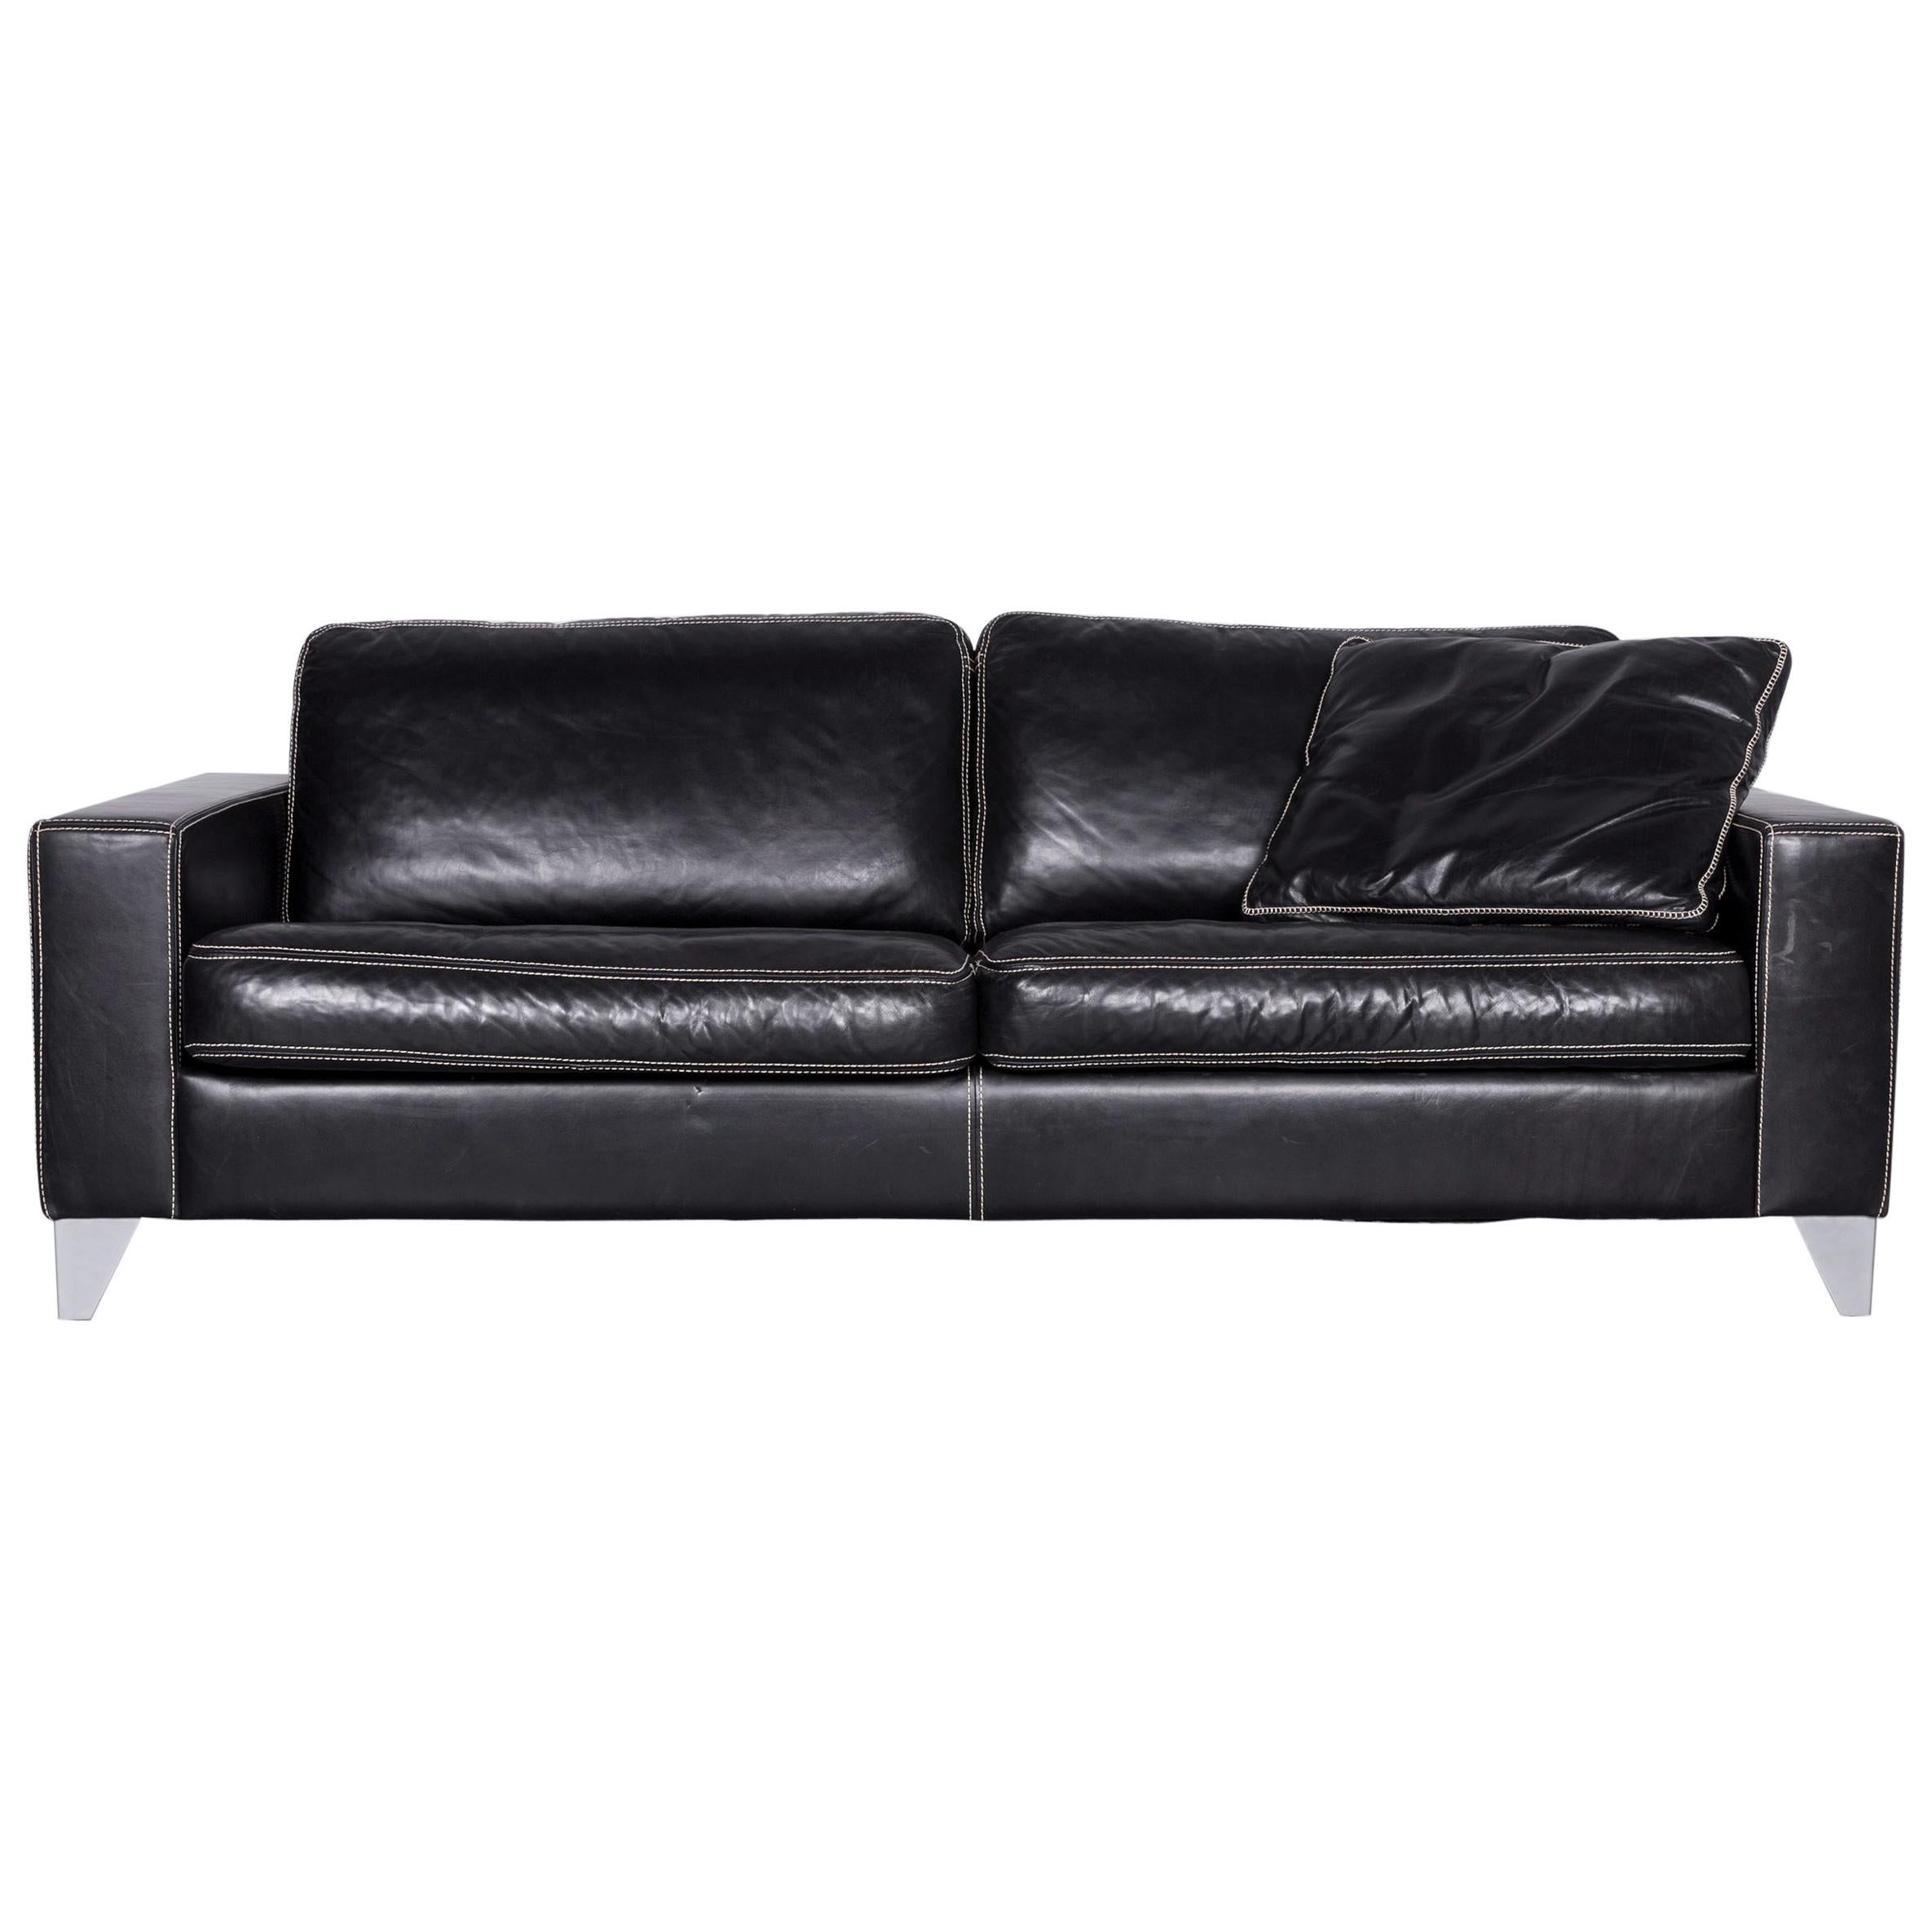 Activineo Designer Leather Sofa Black Two-Seat Couch For Sale